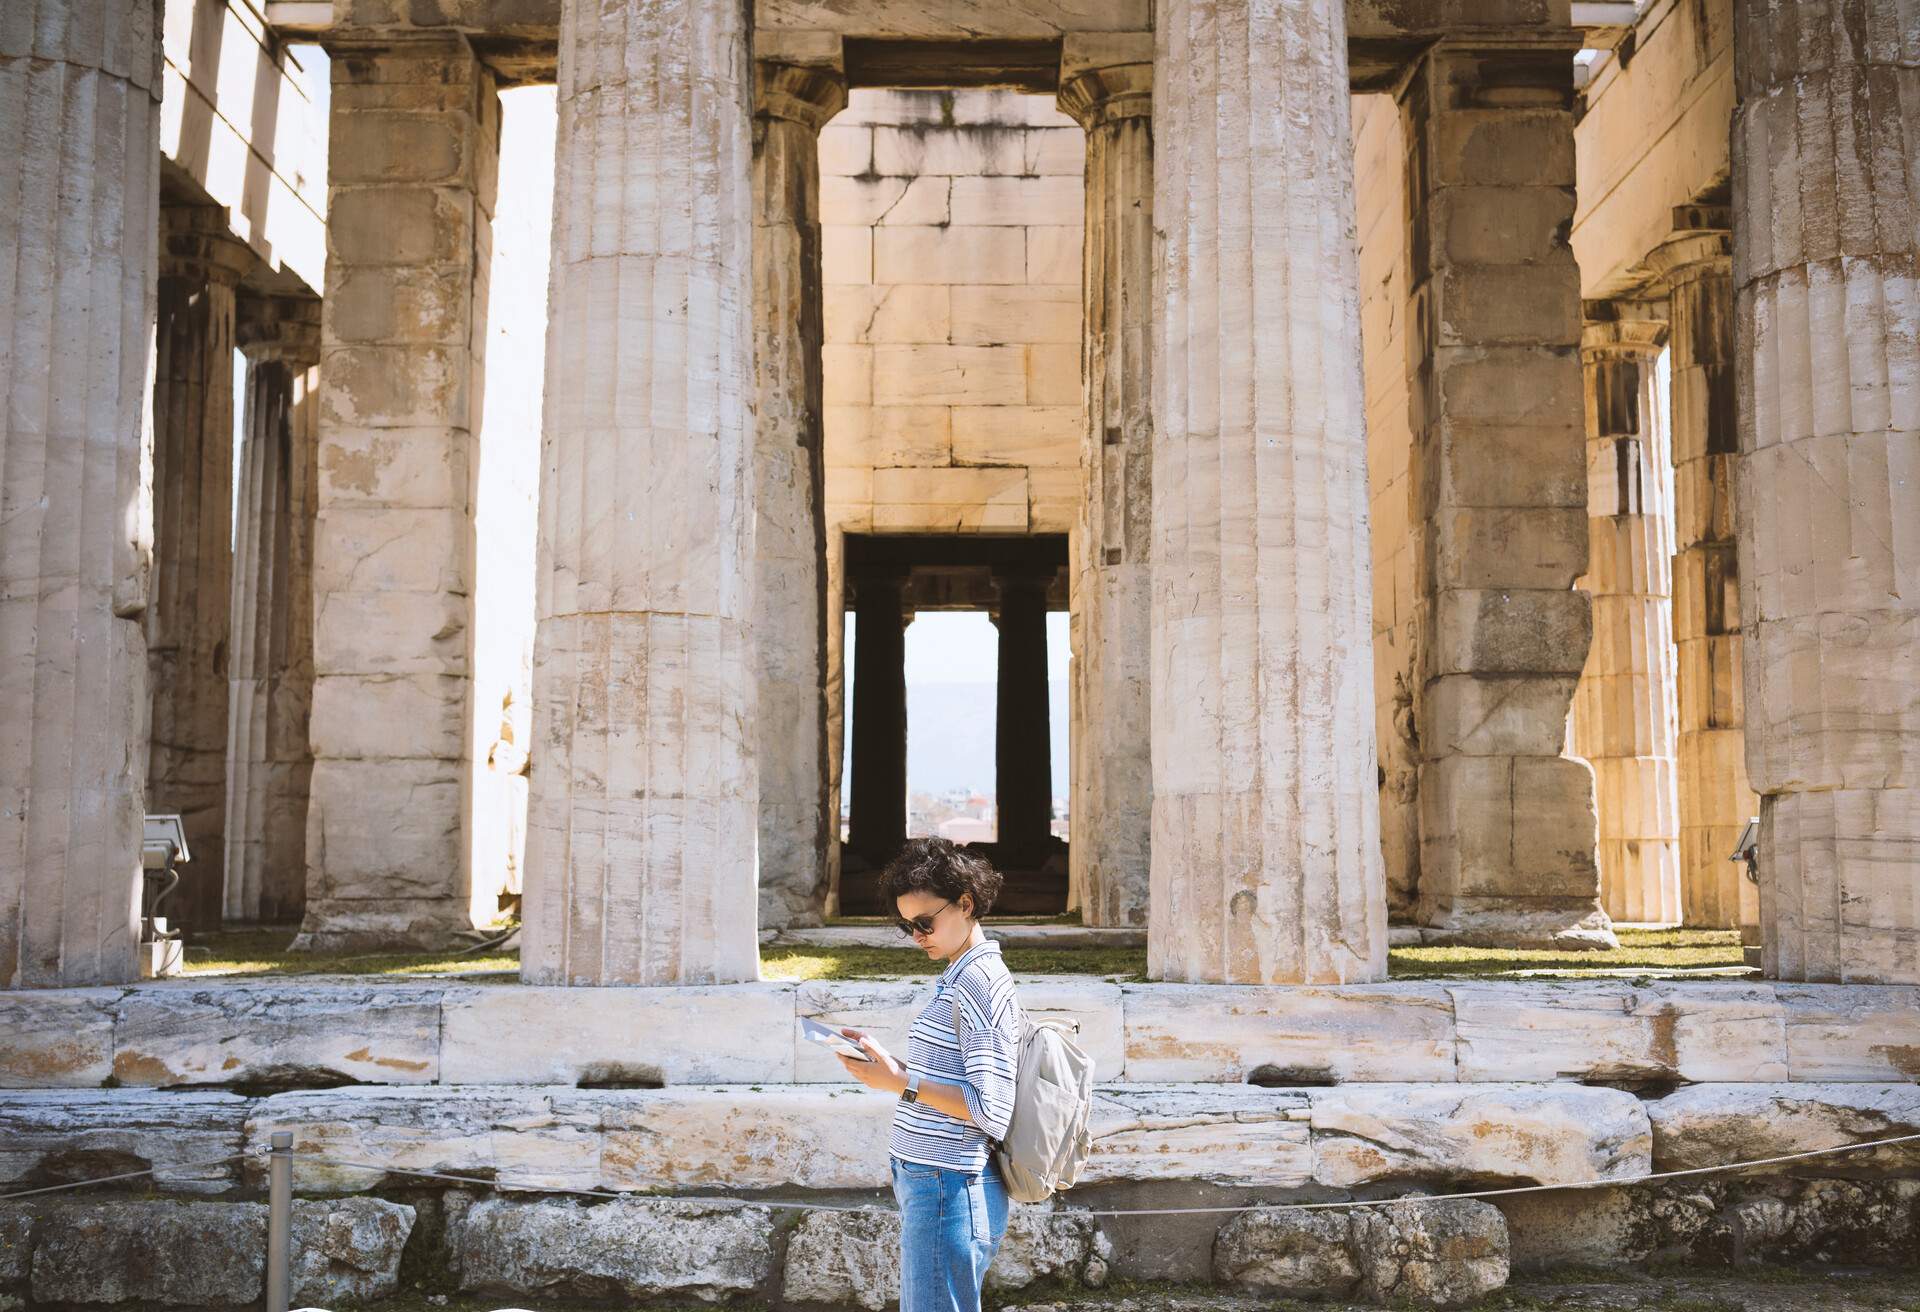 DEST_GREECE_ATHENS_AGORA_Temple of Hephaistos_GettyImages-866771976